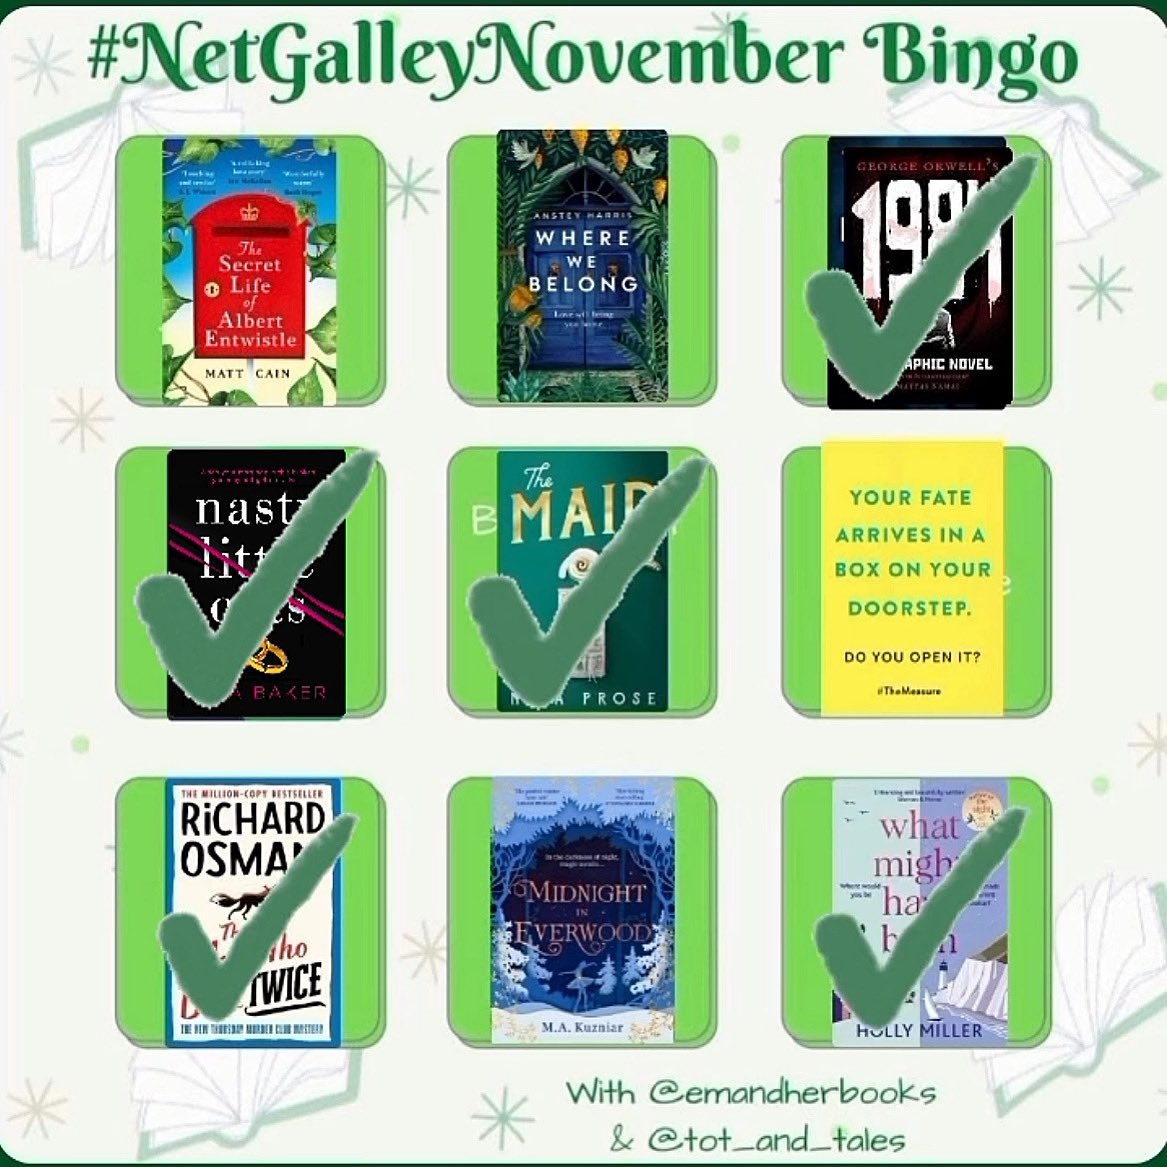 So NetGalley November is finished again! How did it go so quick. I read 5 books :) 

Thanks to @NetGalleyNov @emandherbooks @tot_and_tales for organising ❤️

instagram.com/p/CW5aQGzgVGW/…

#NetGalleyNovember #books #WrapUp